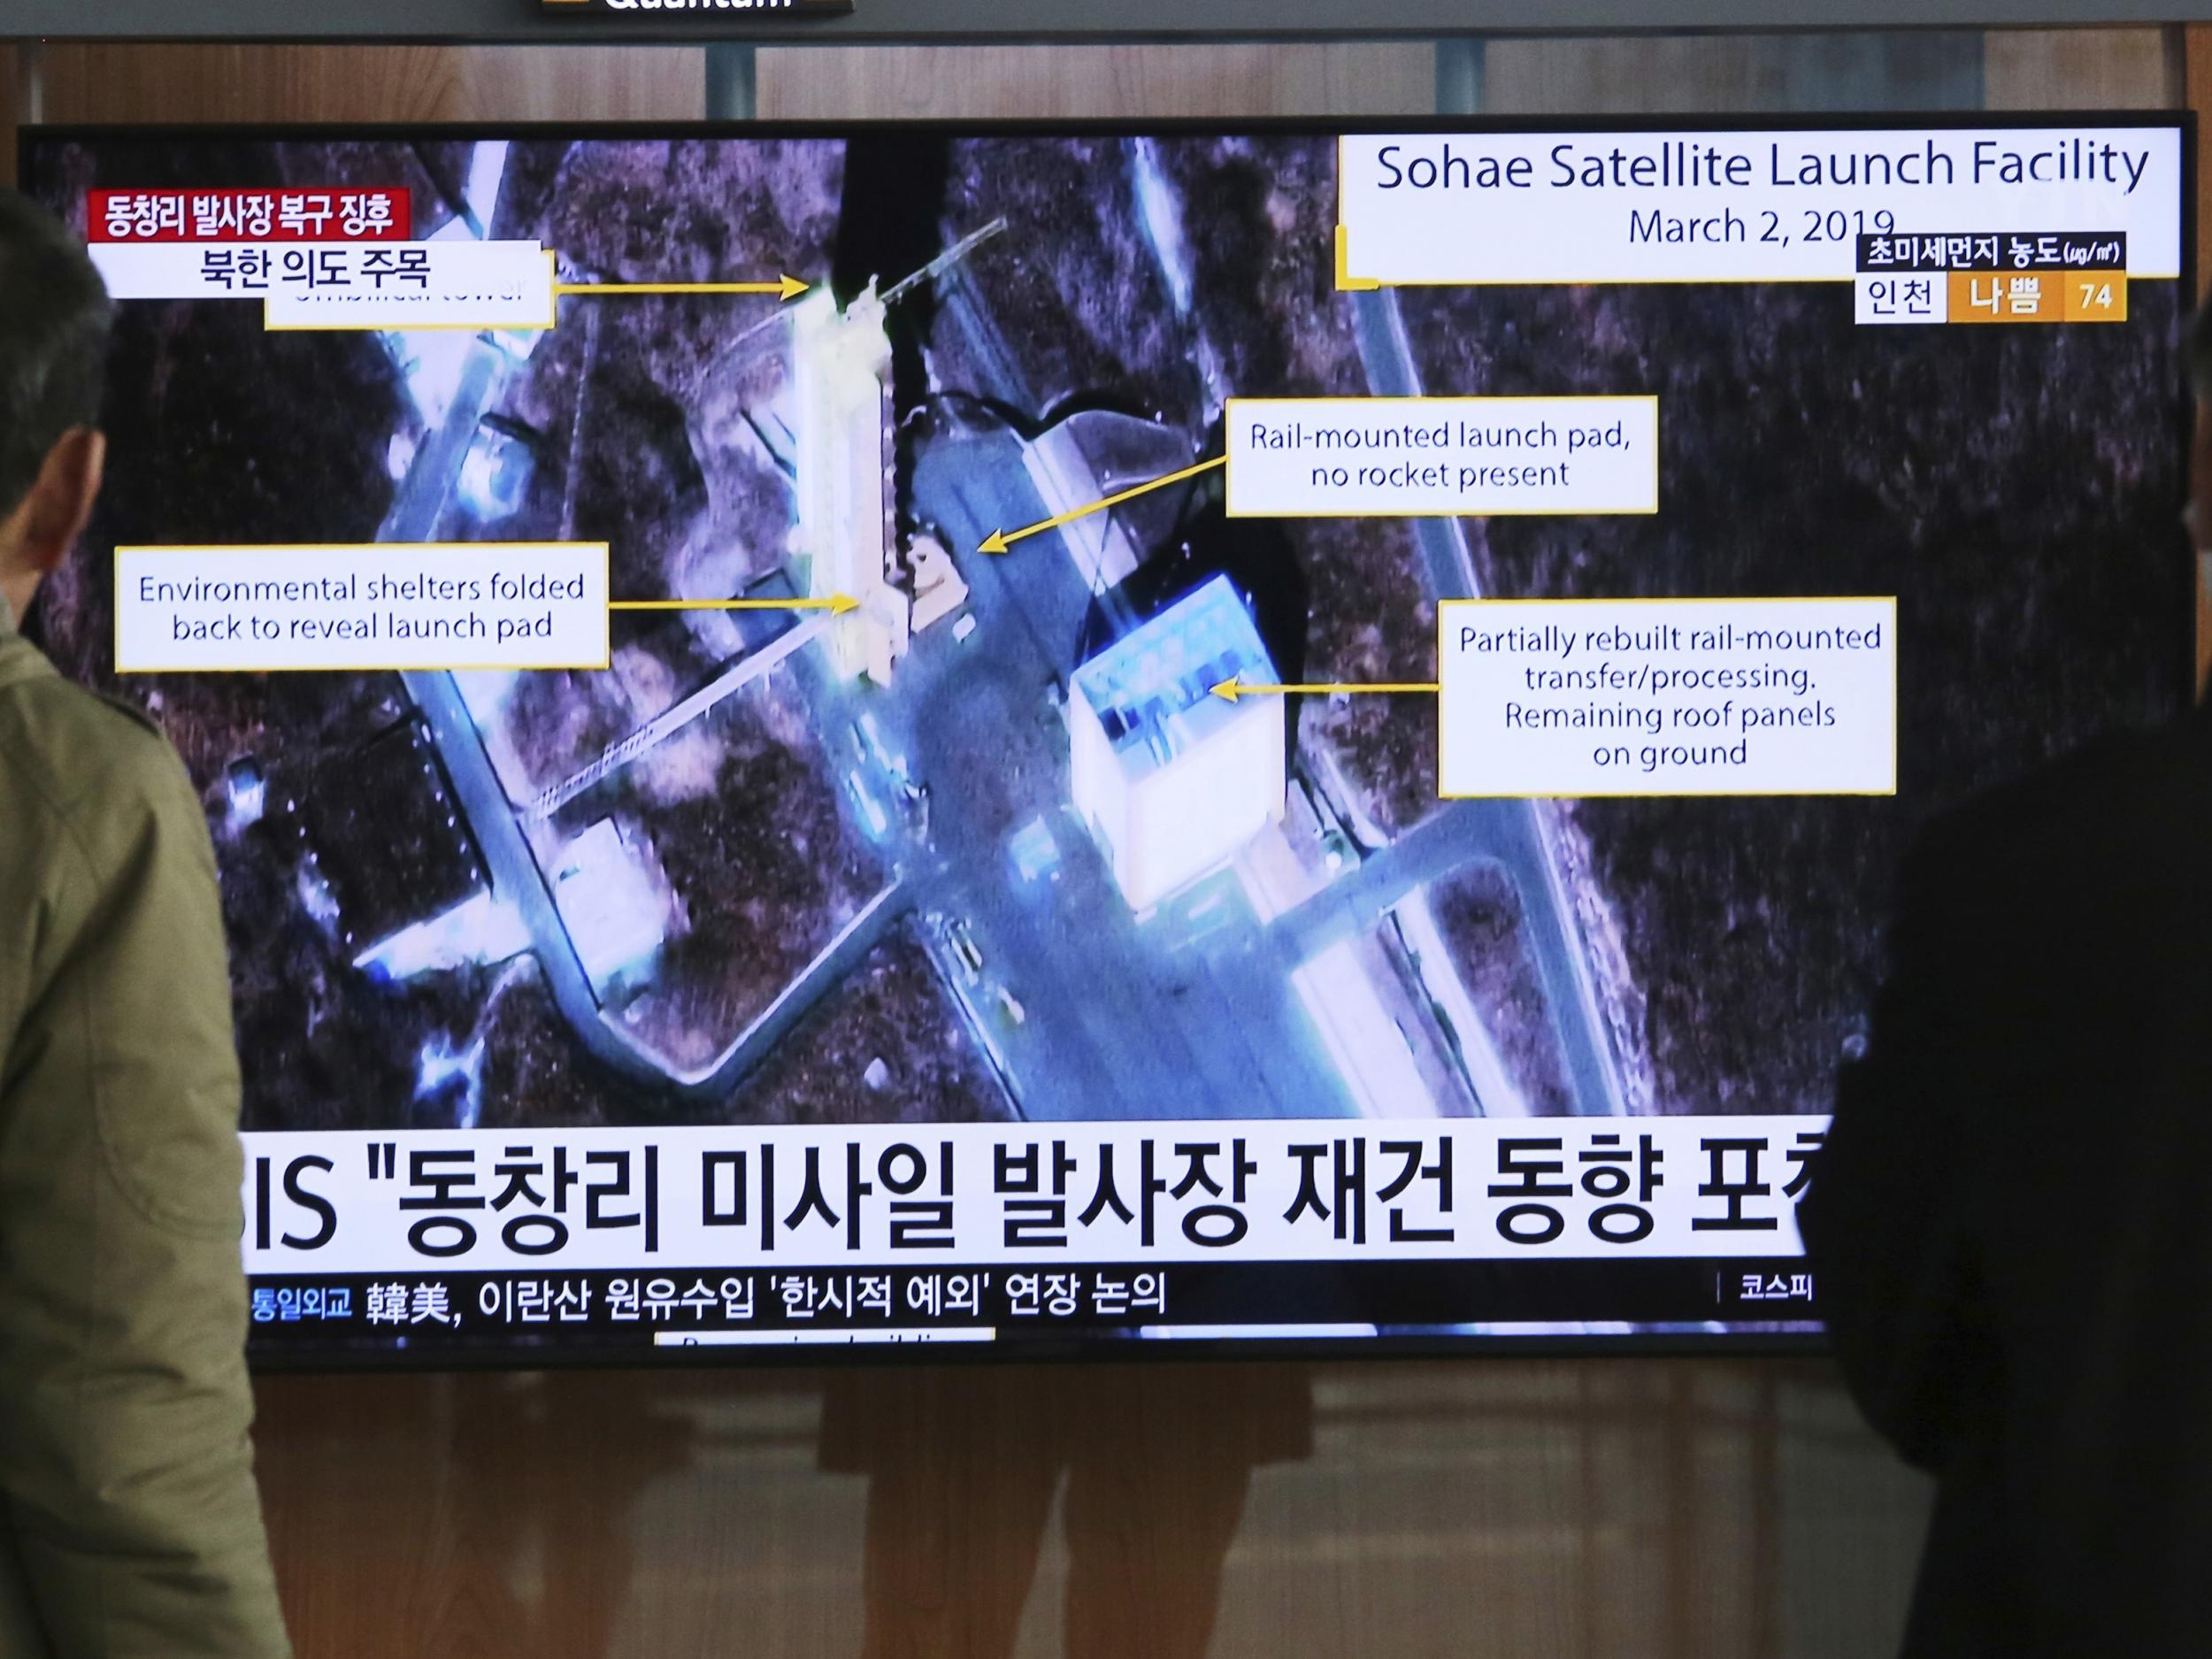 A TV screen in South Korea shows a satellite image of Sohae, North Korea's long-range missile testing site